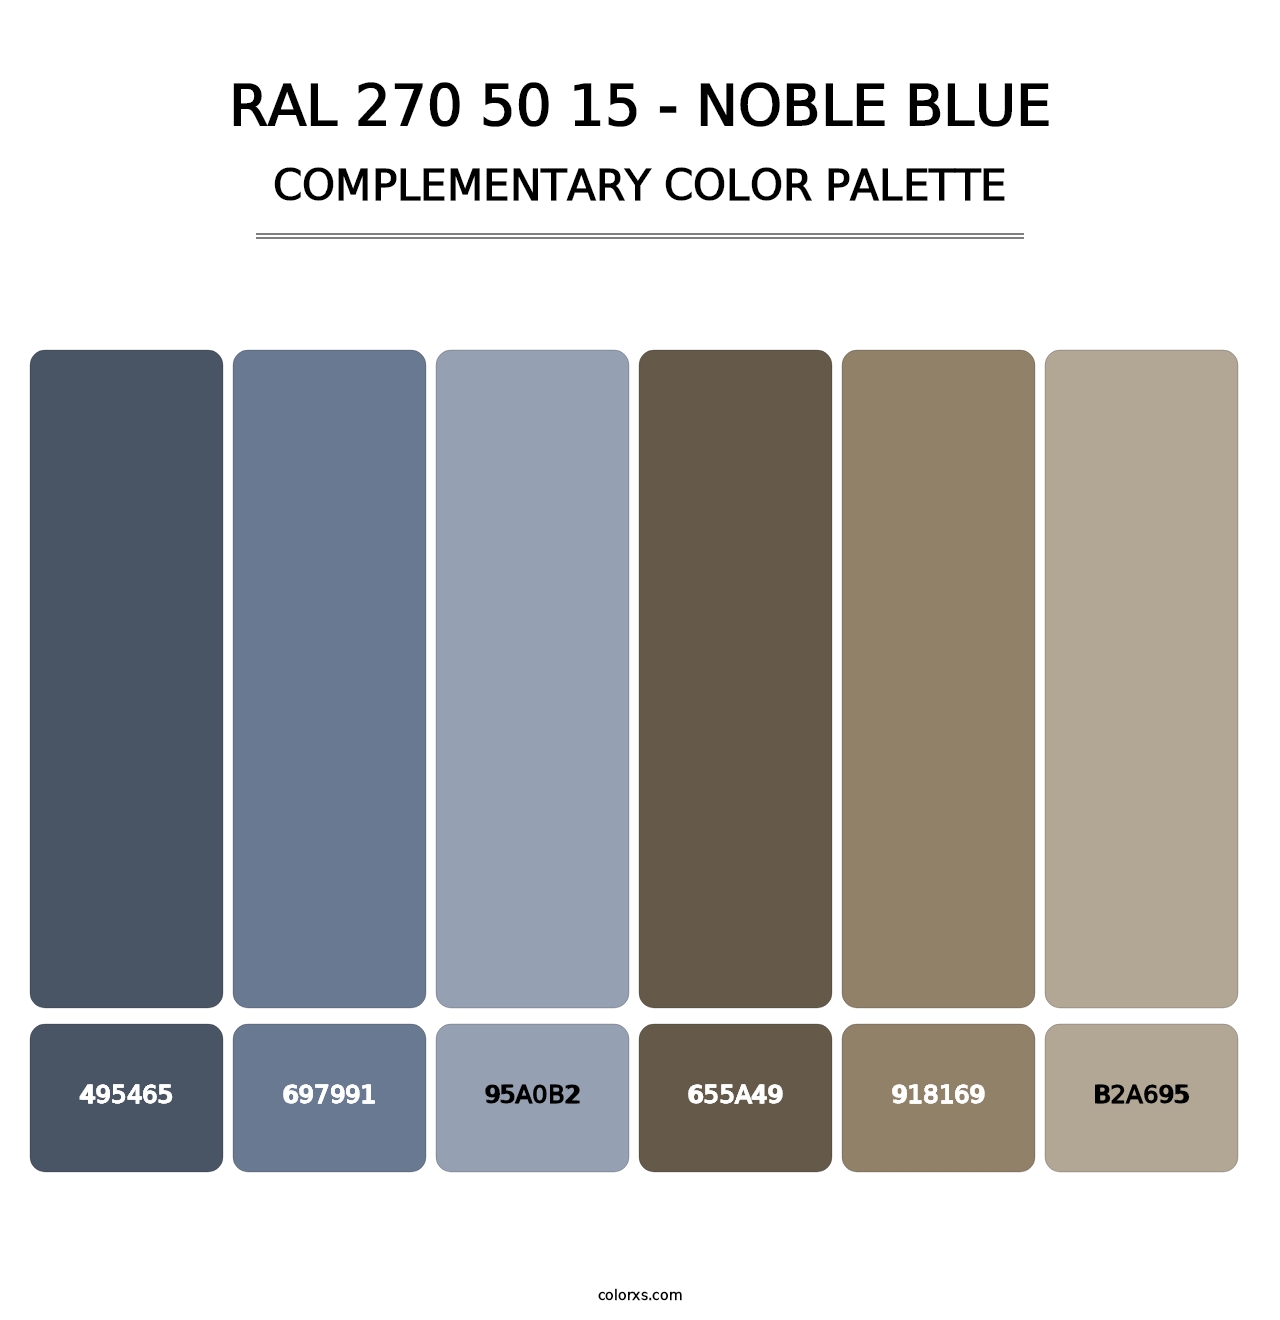 RAL 270 50 15 - Noble Blue - Complementary Color Palette